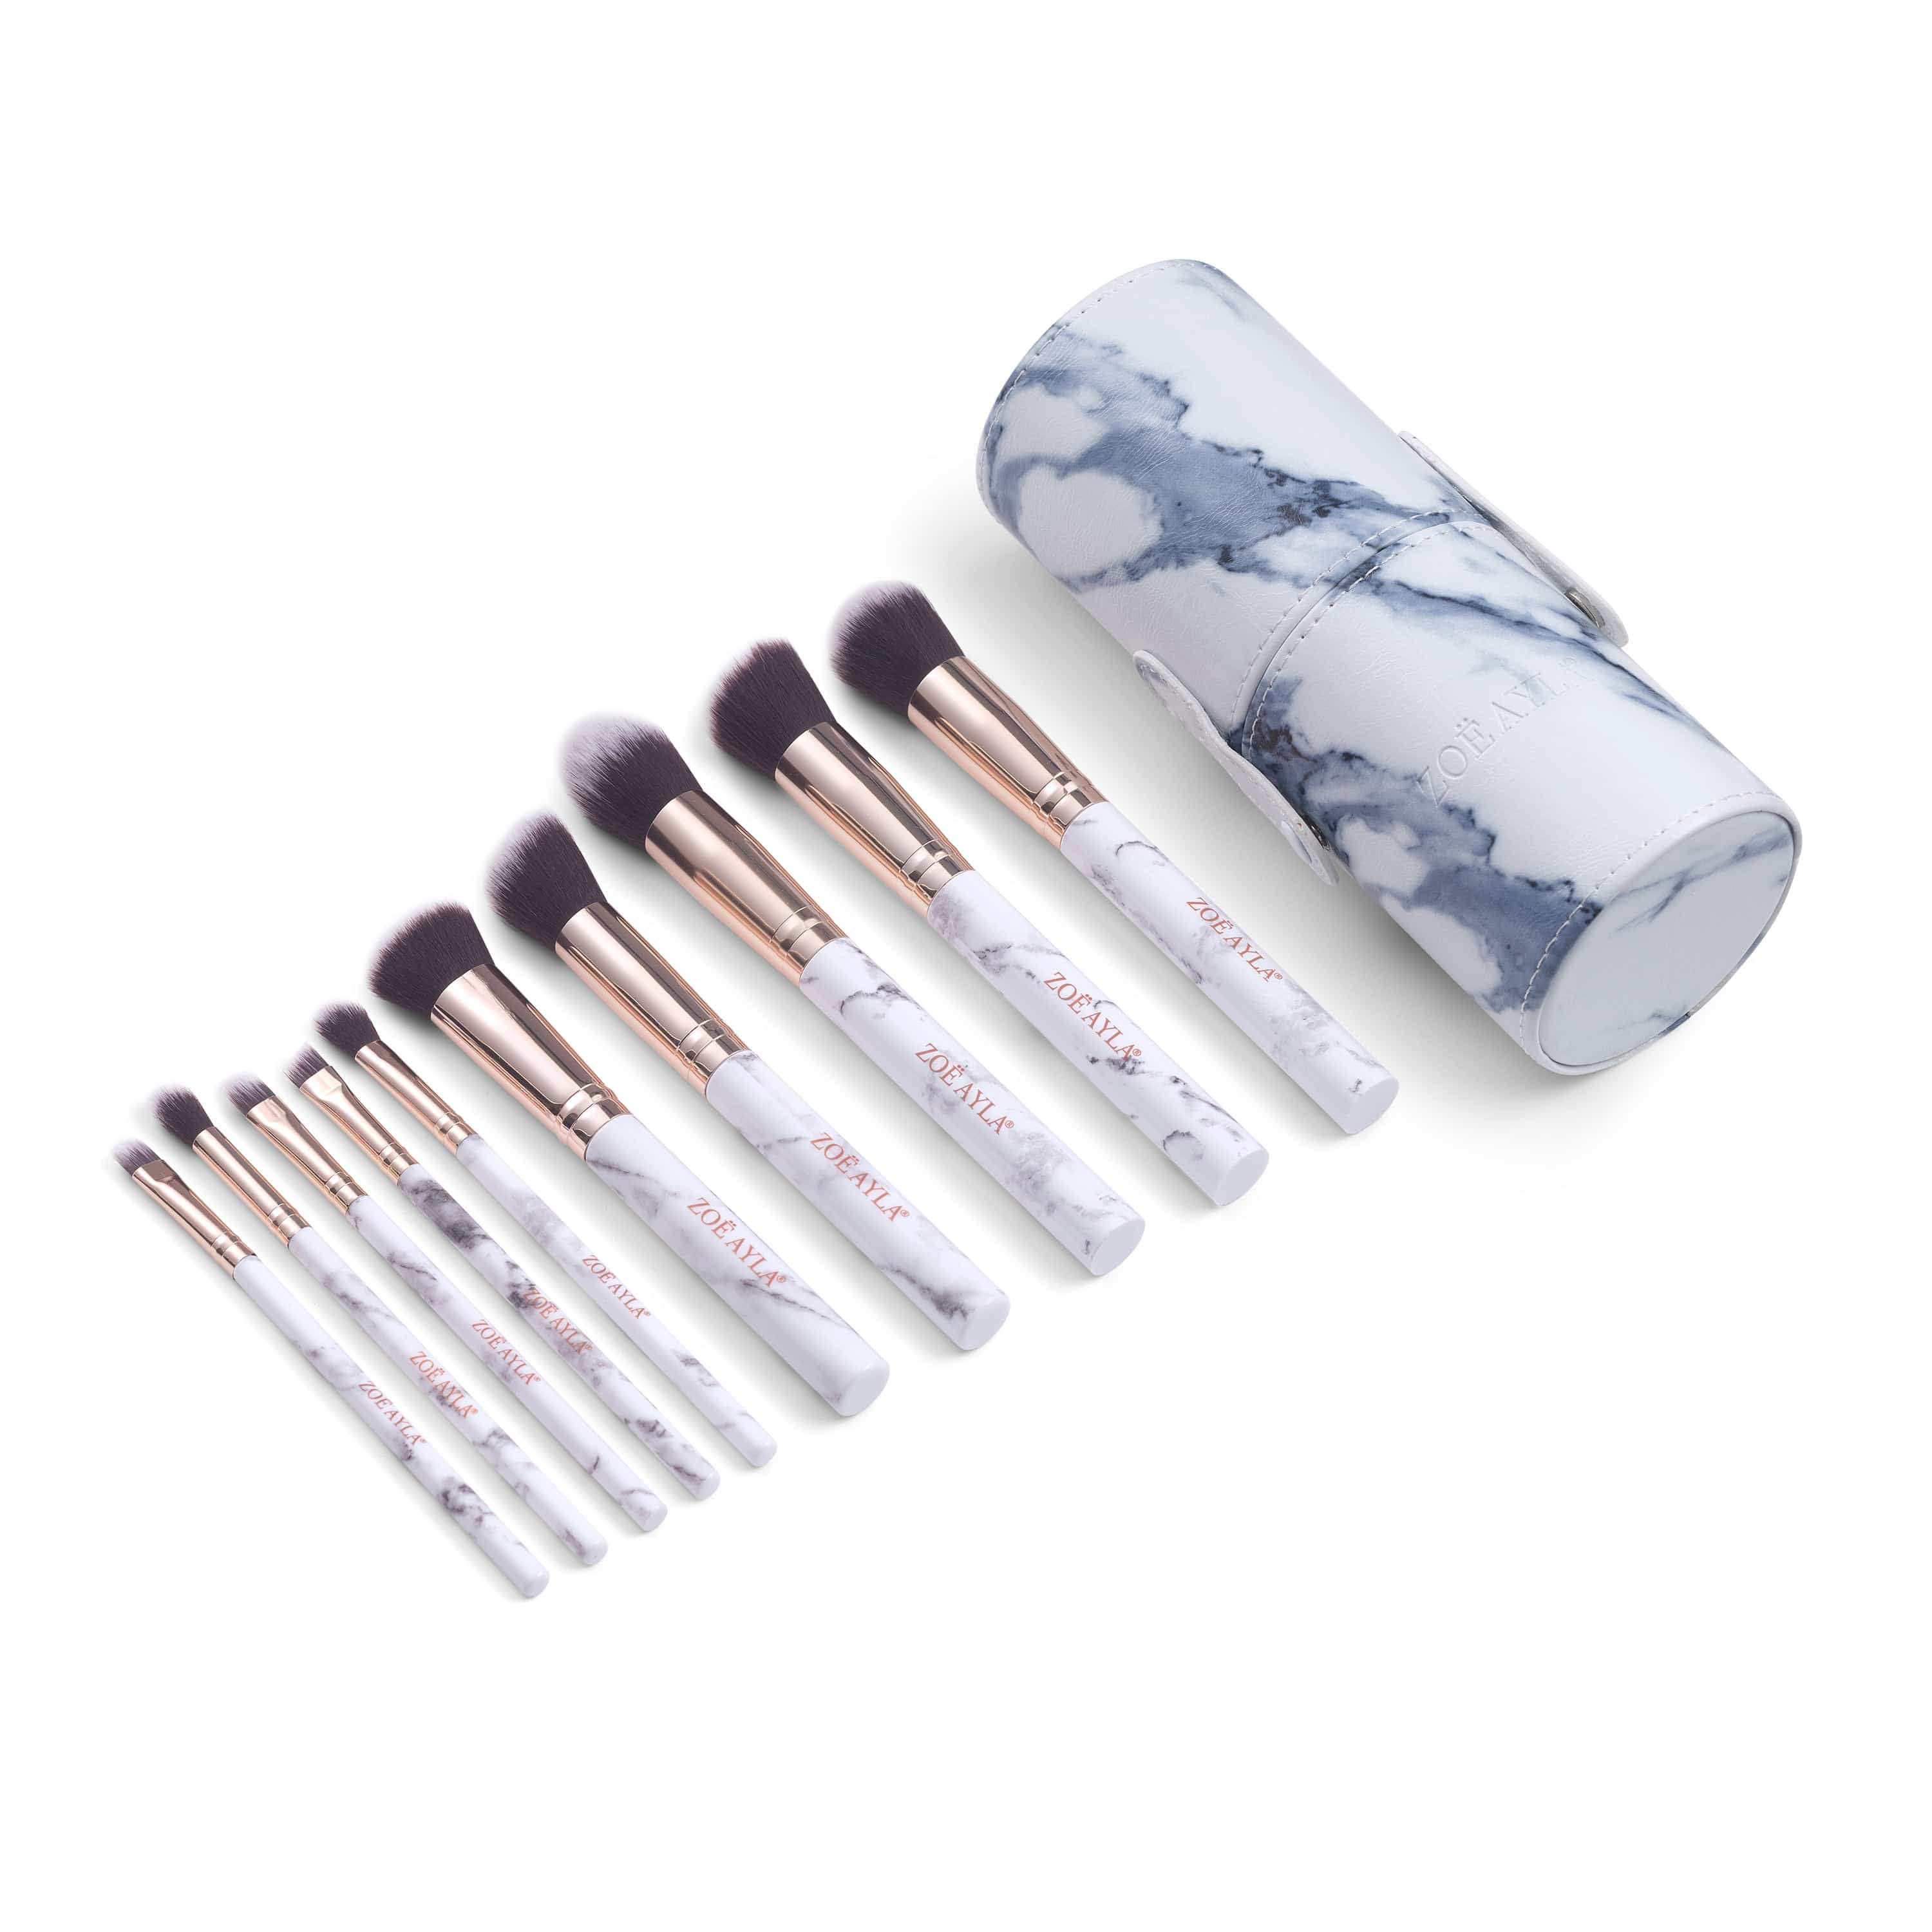 10-Piece Makeup Brush Set with Cylindric Case